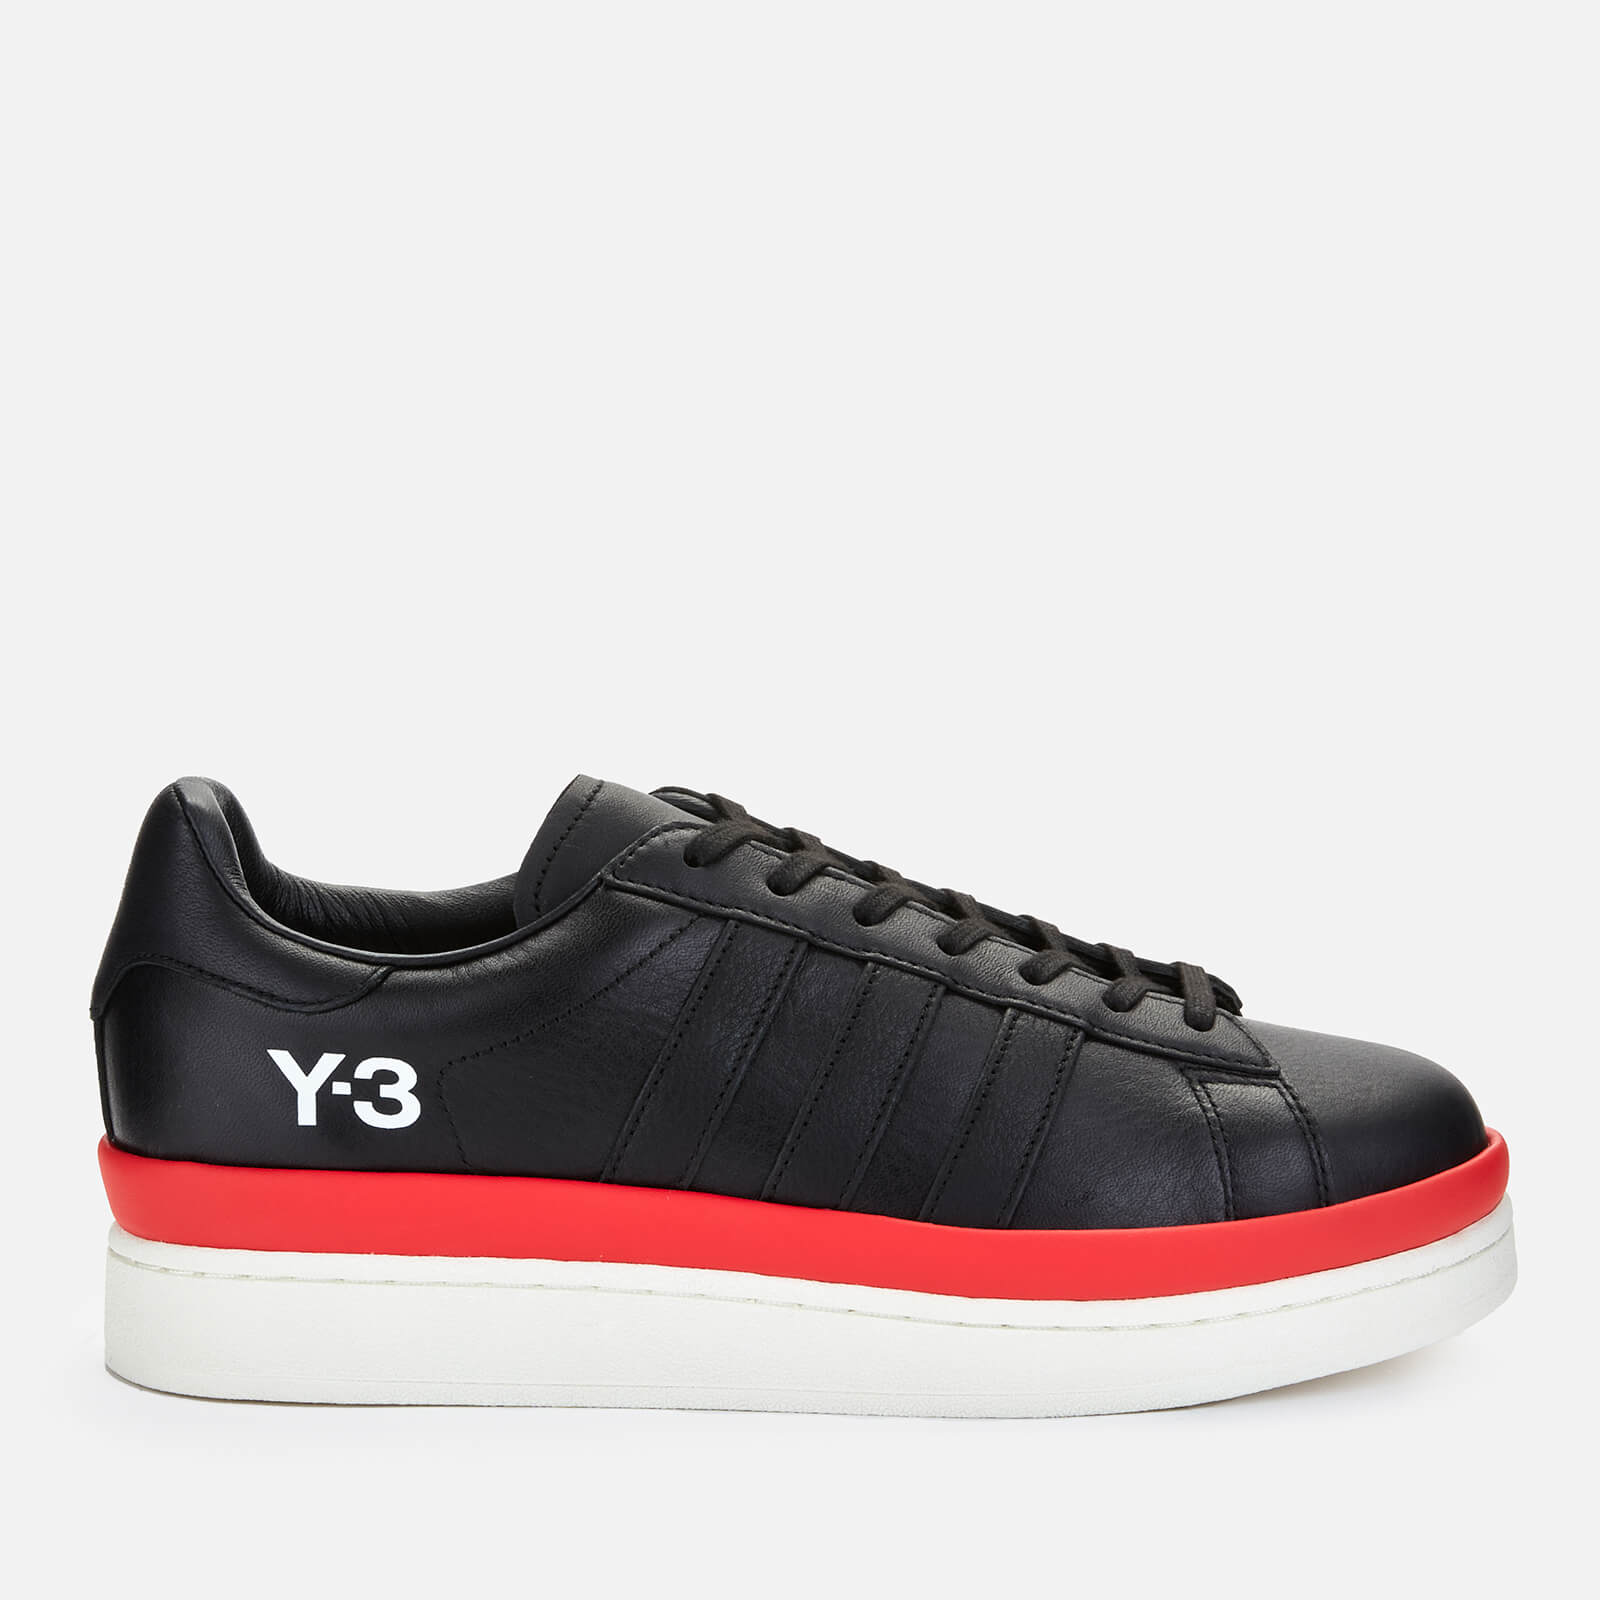 Y-3 Men's Hicho Leather Low Top Trainers - Black/Off White/Red - UK 7